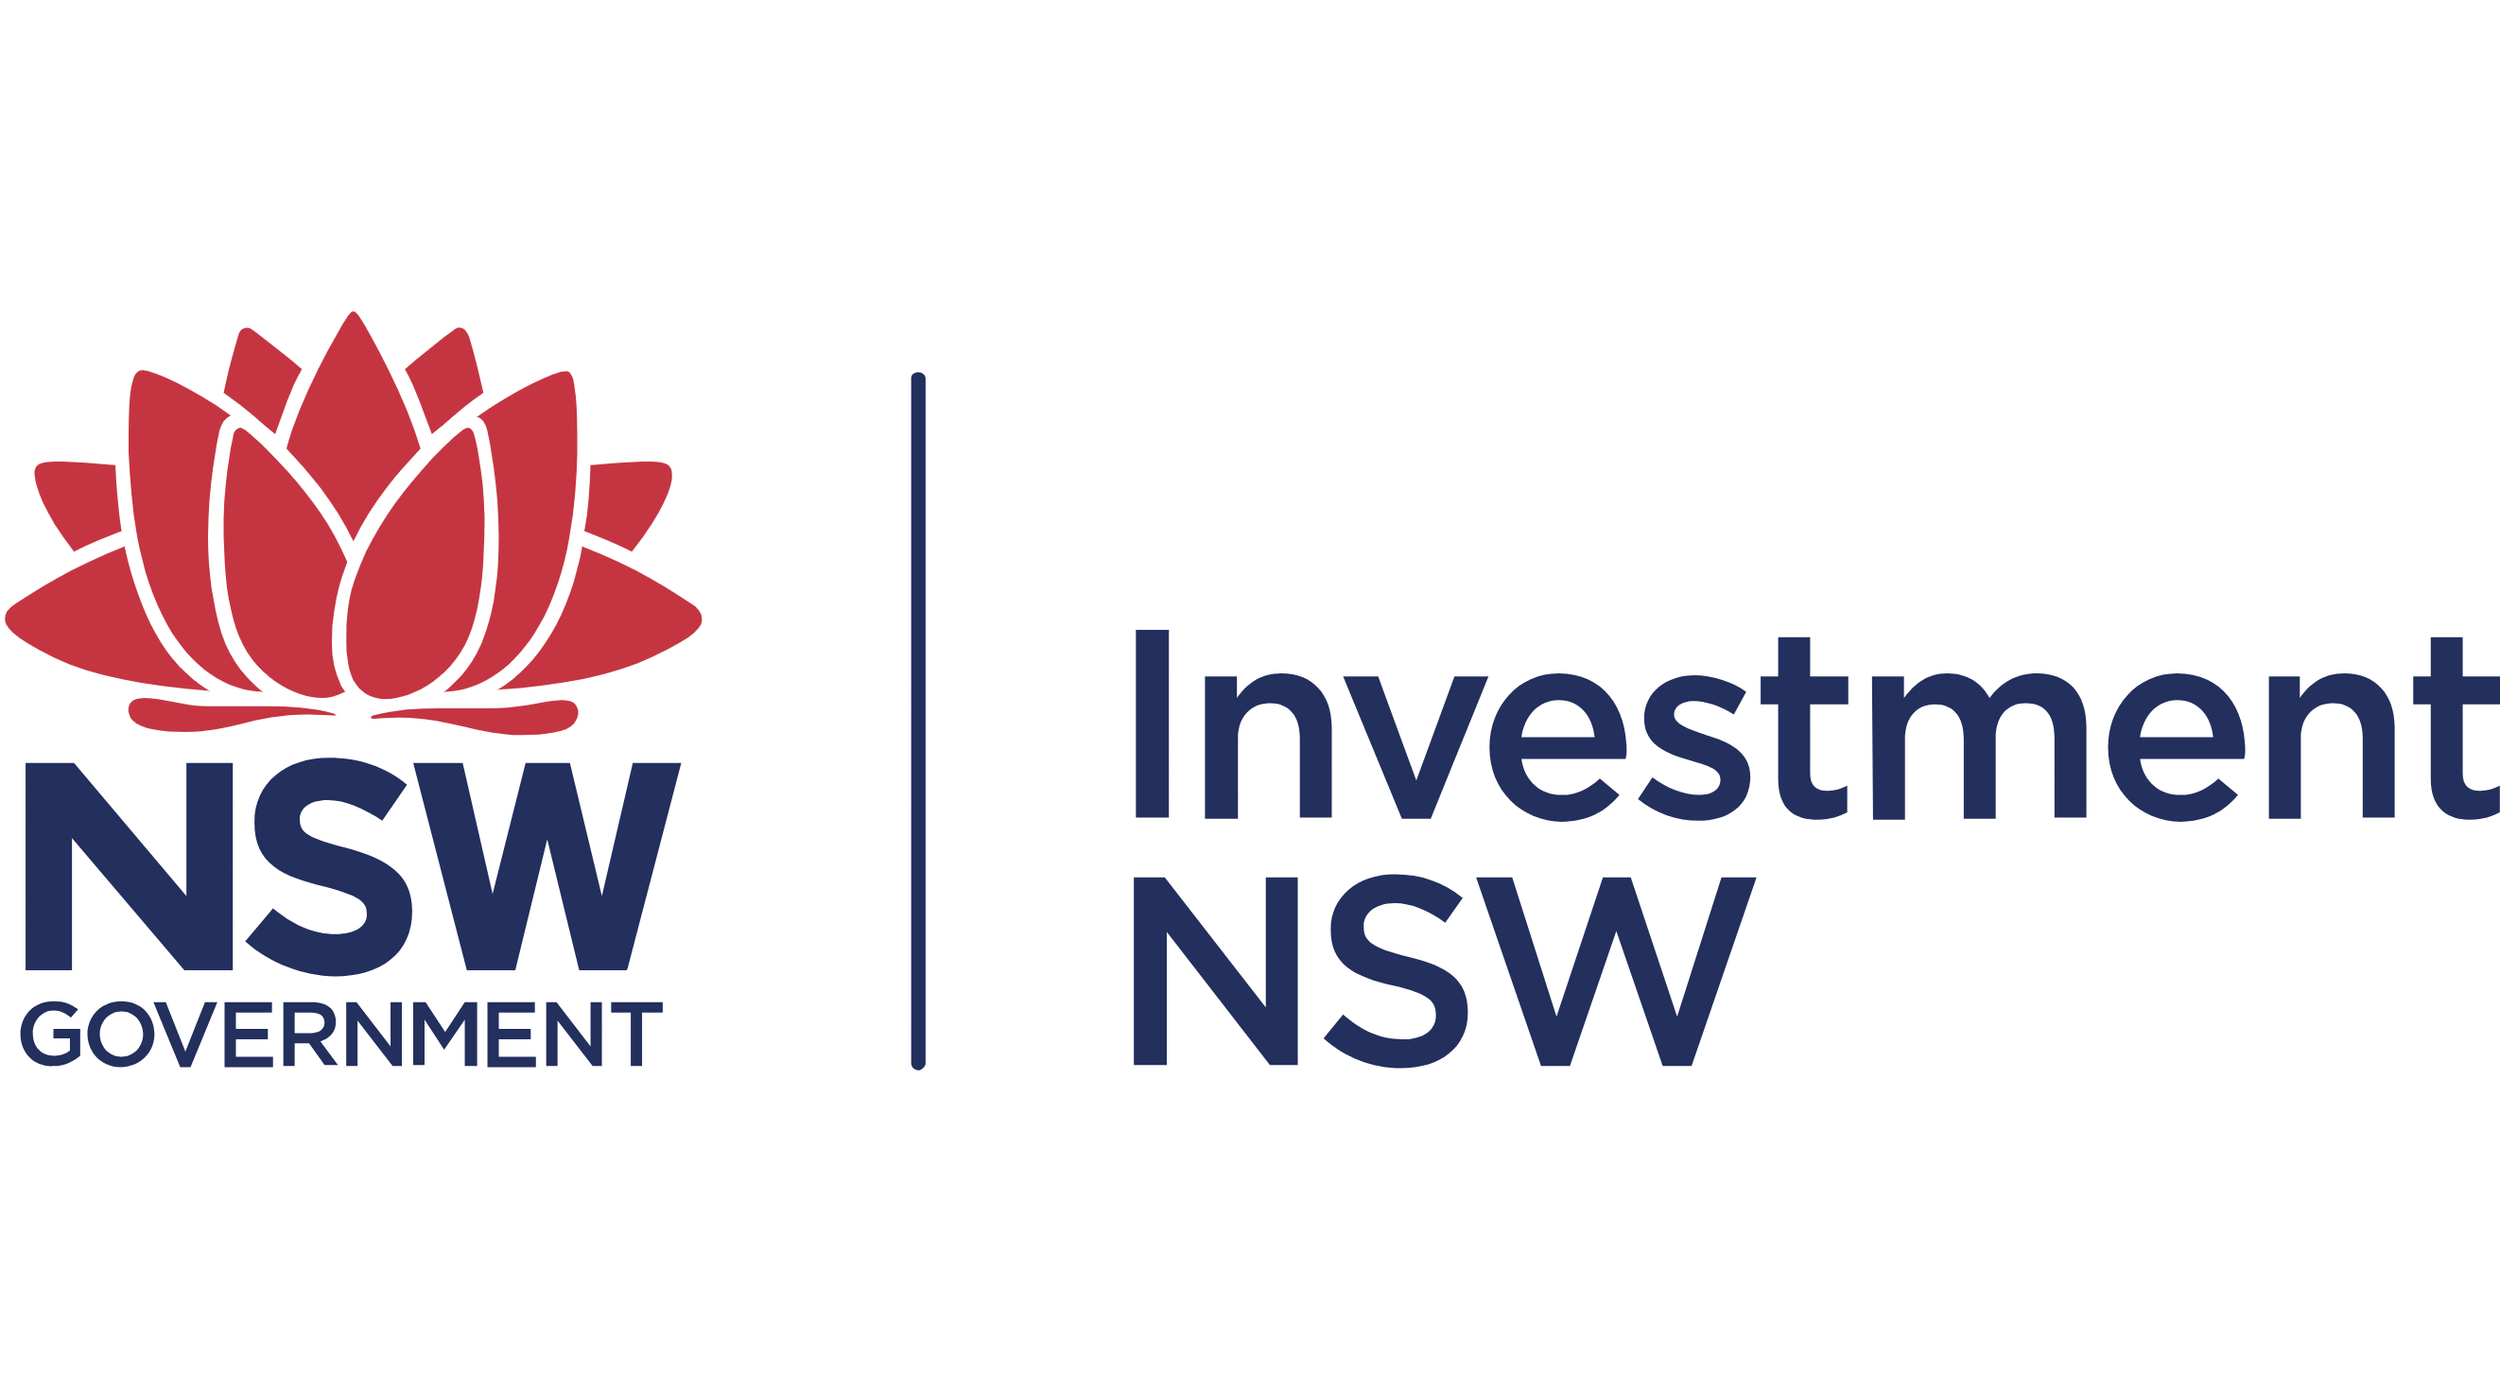 Image+2Investment+NSW+logo.png.sqs-block-content.png